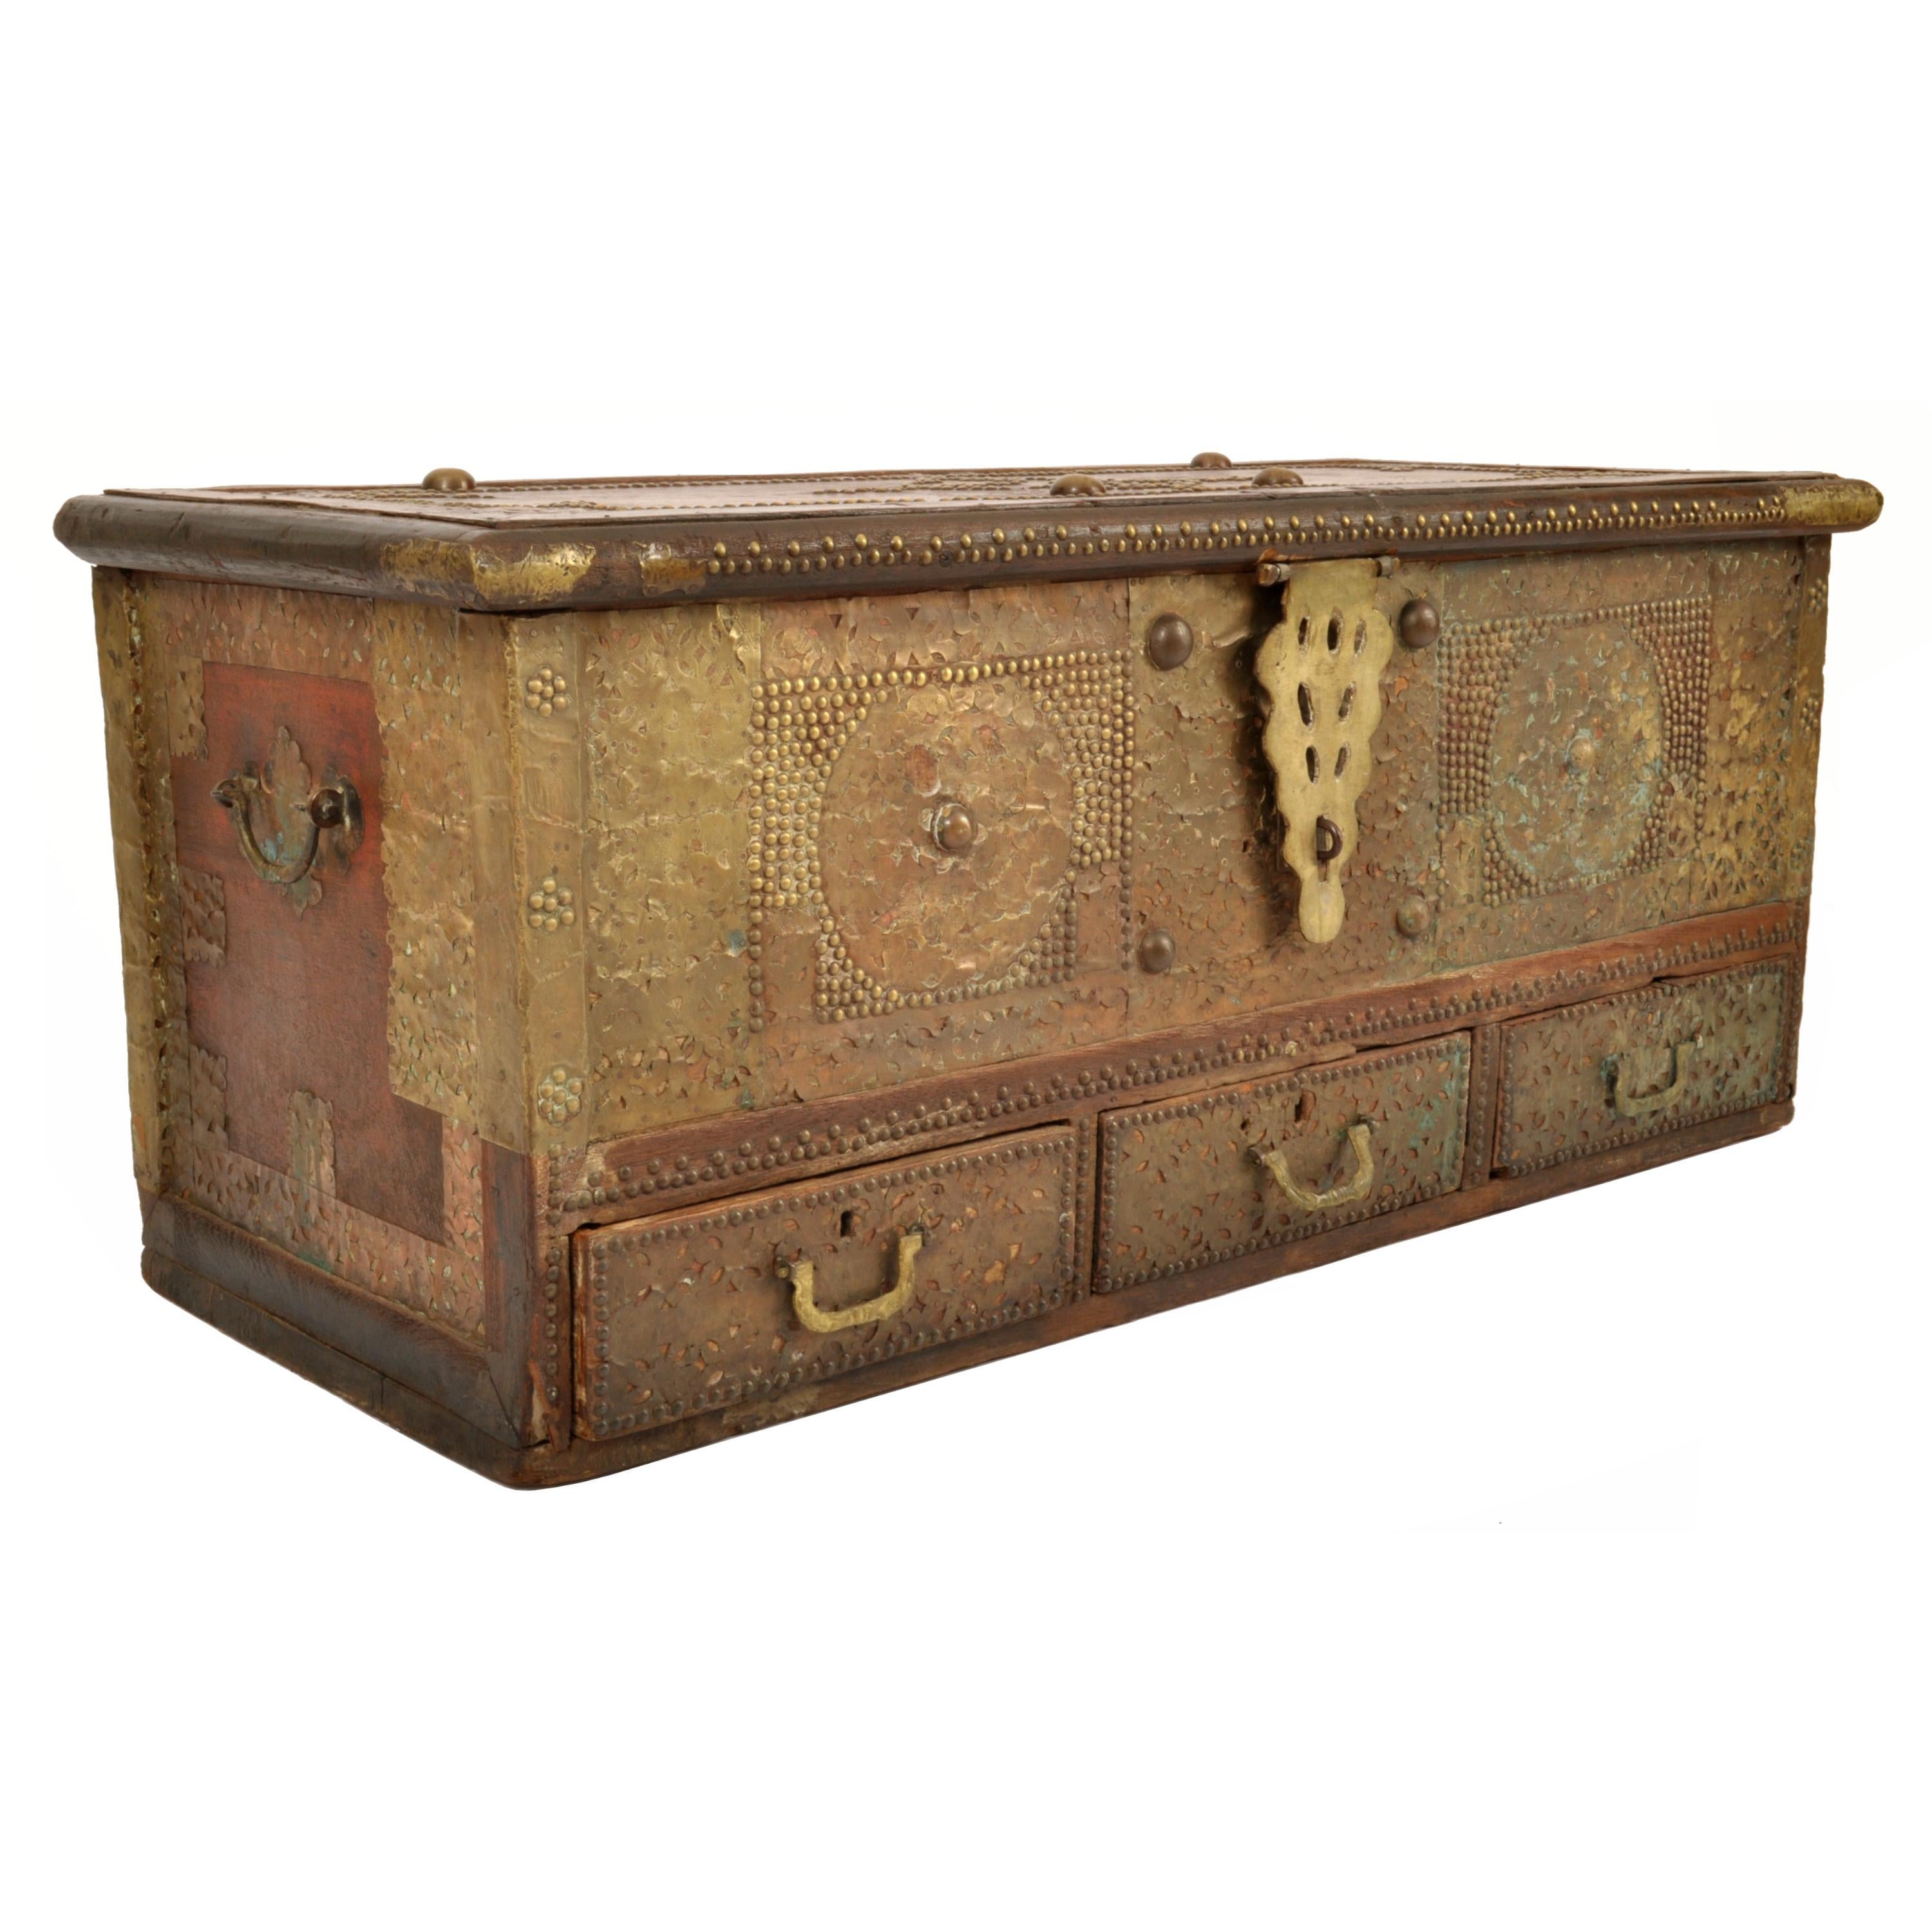 A good antique 'Zanzibar' teak and brass stud work with copper overlay dowry chest, circa 1850.
A better than the usual Zanzibar dowry chest, the hinge lidded chest profusely decorated with brass studwork in geometric designs, also clad with